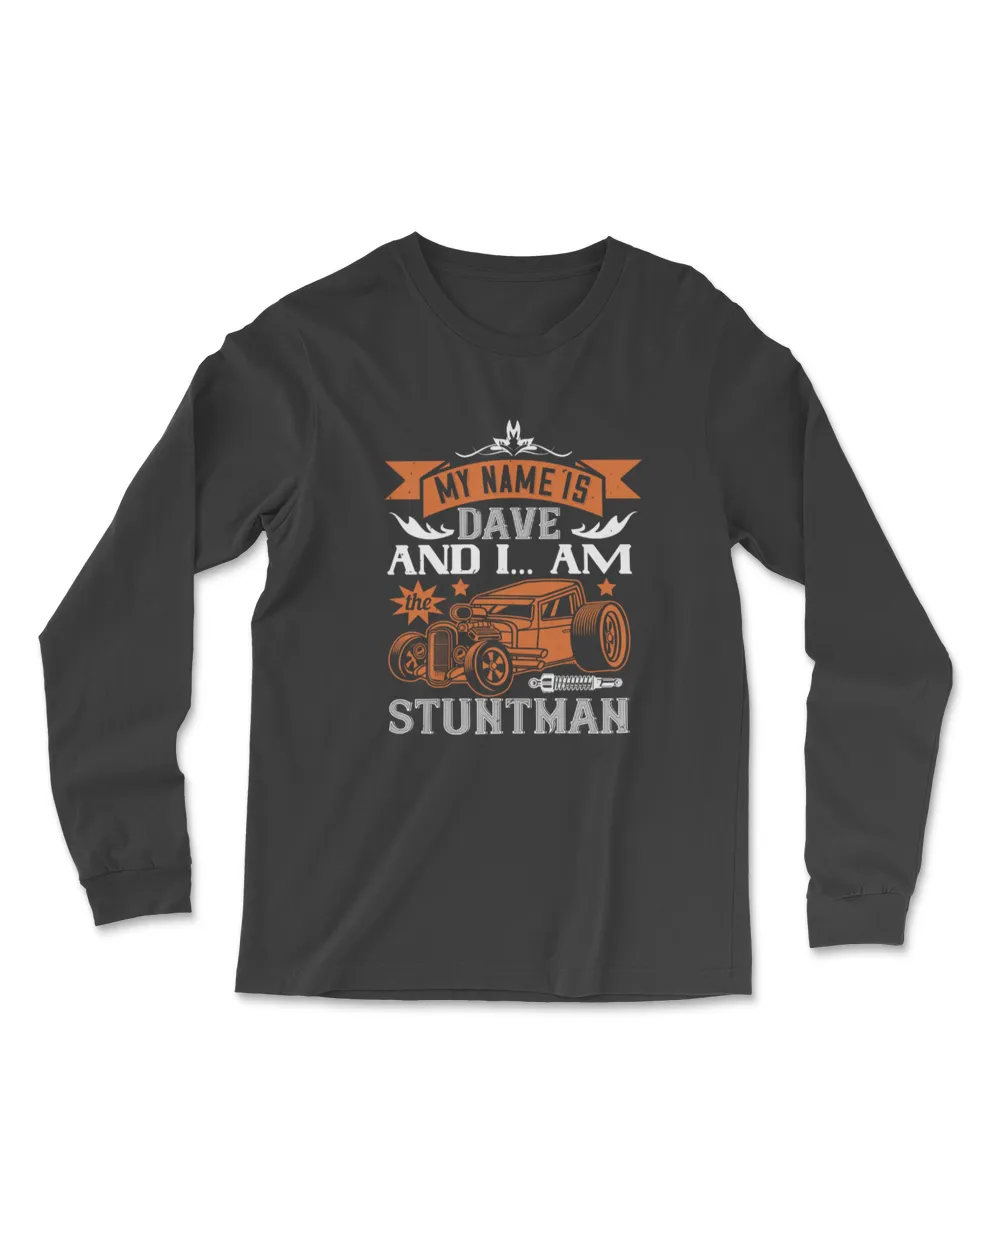 My Name Is Dave And I Am The Stuntman Hot Rod T-Shirt